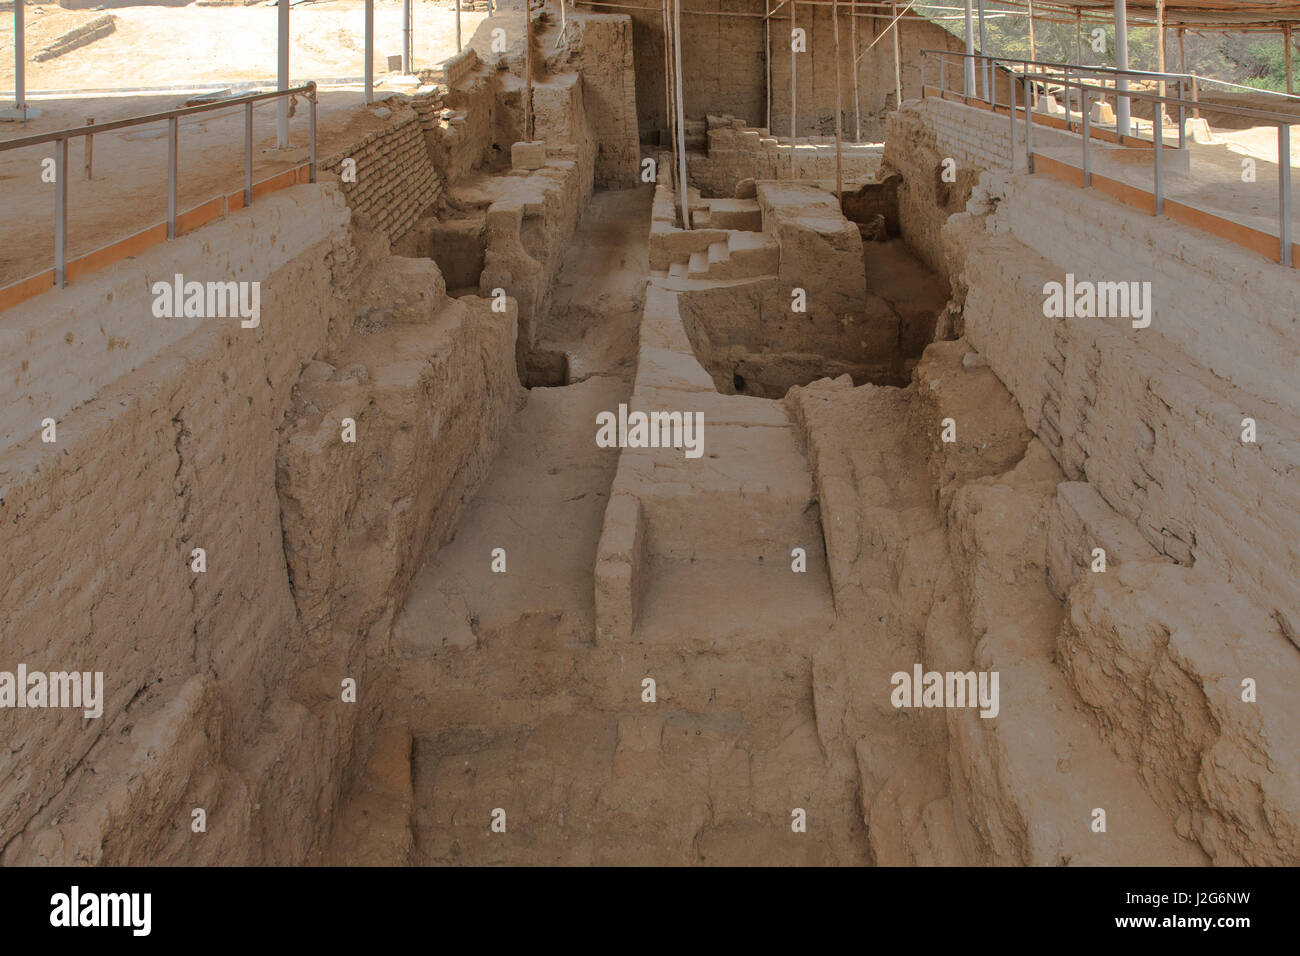 This is one of the Moche Tombs sites excavated in 1987. it is called Huaca Rajada and the first tombs were constructed in 300A.D. it is considered to be one of the most important archeological discoveries in South America in the last thirty years. Stock Photo